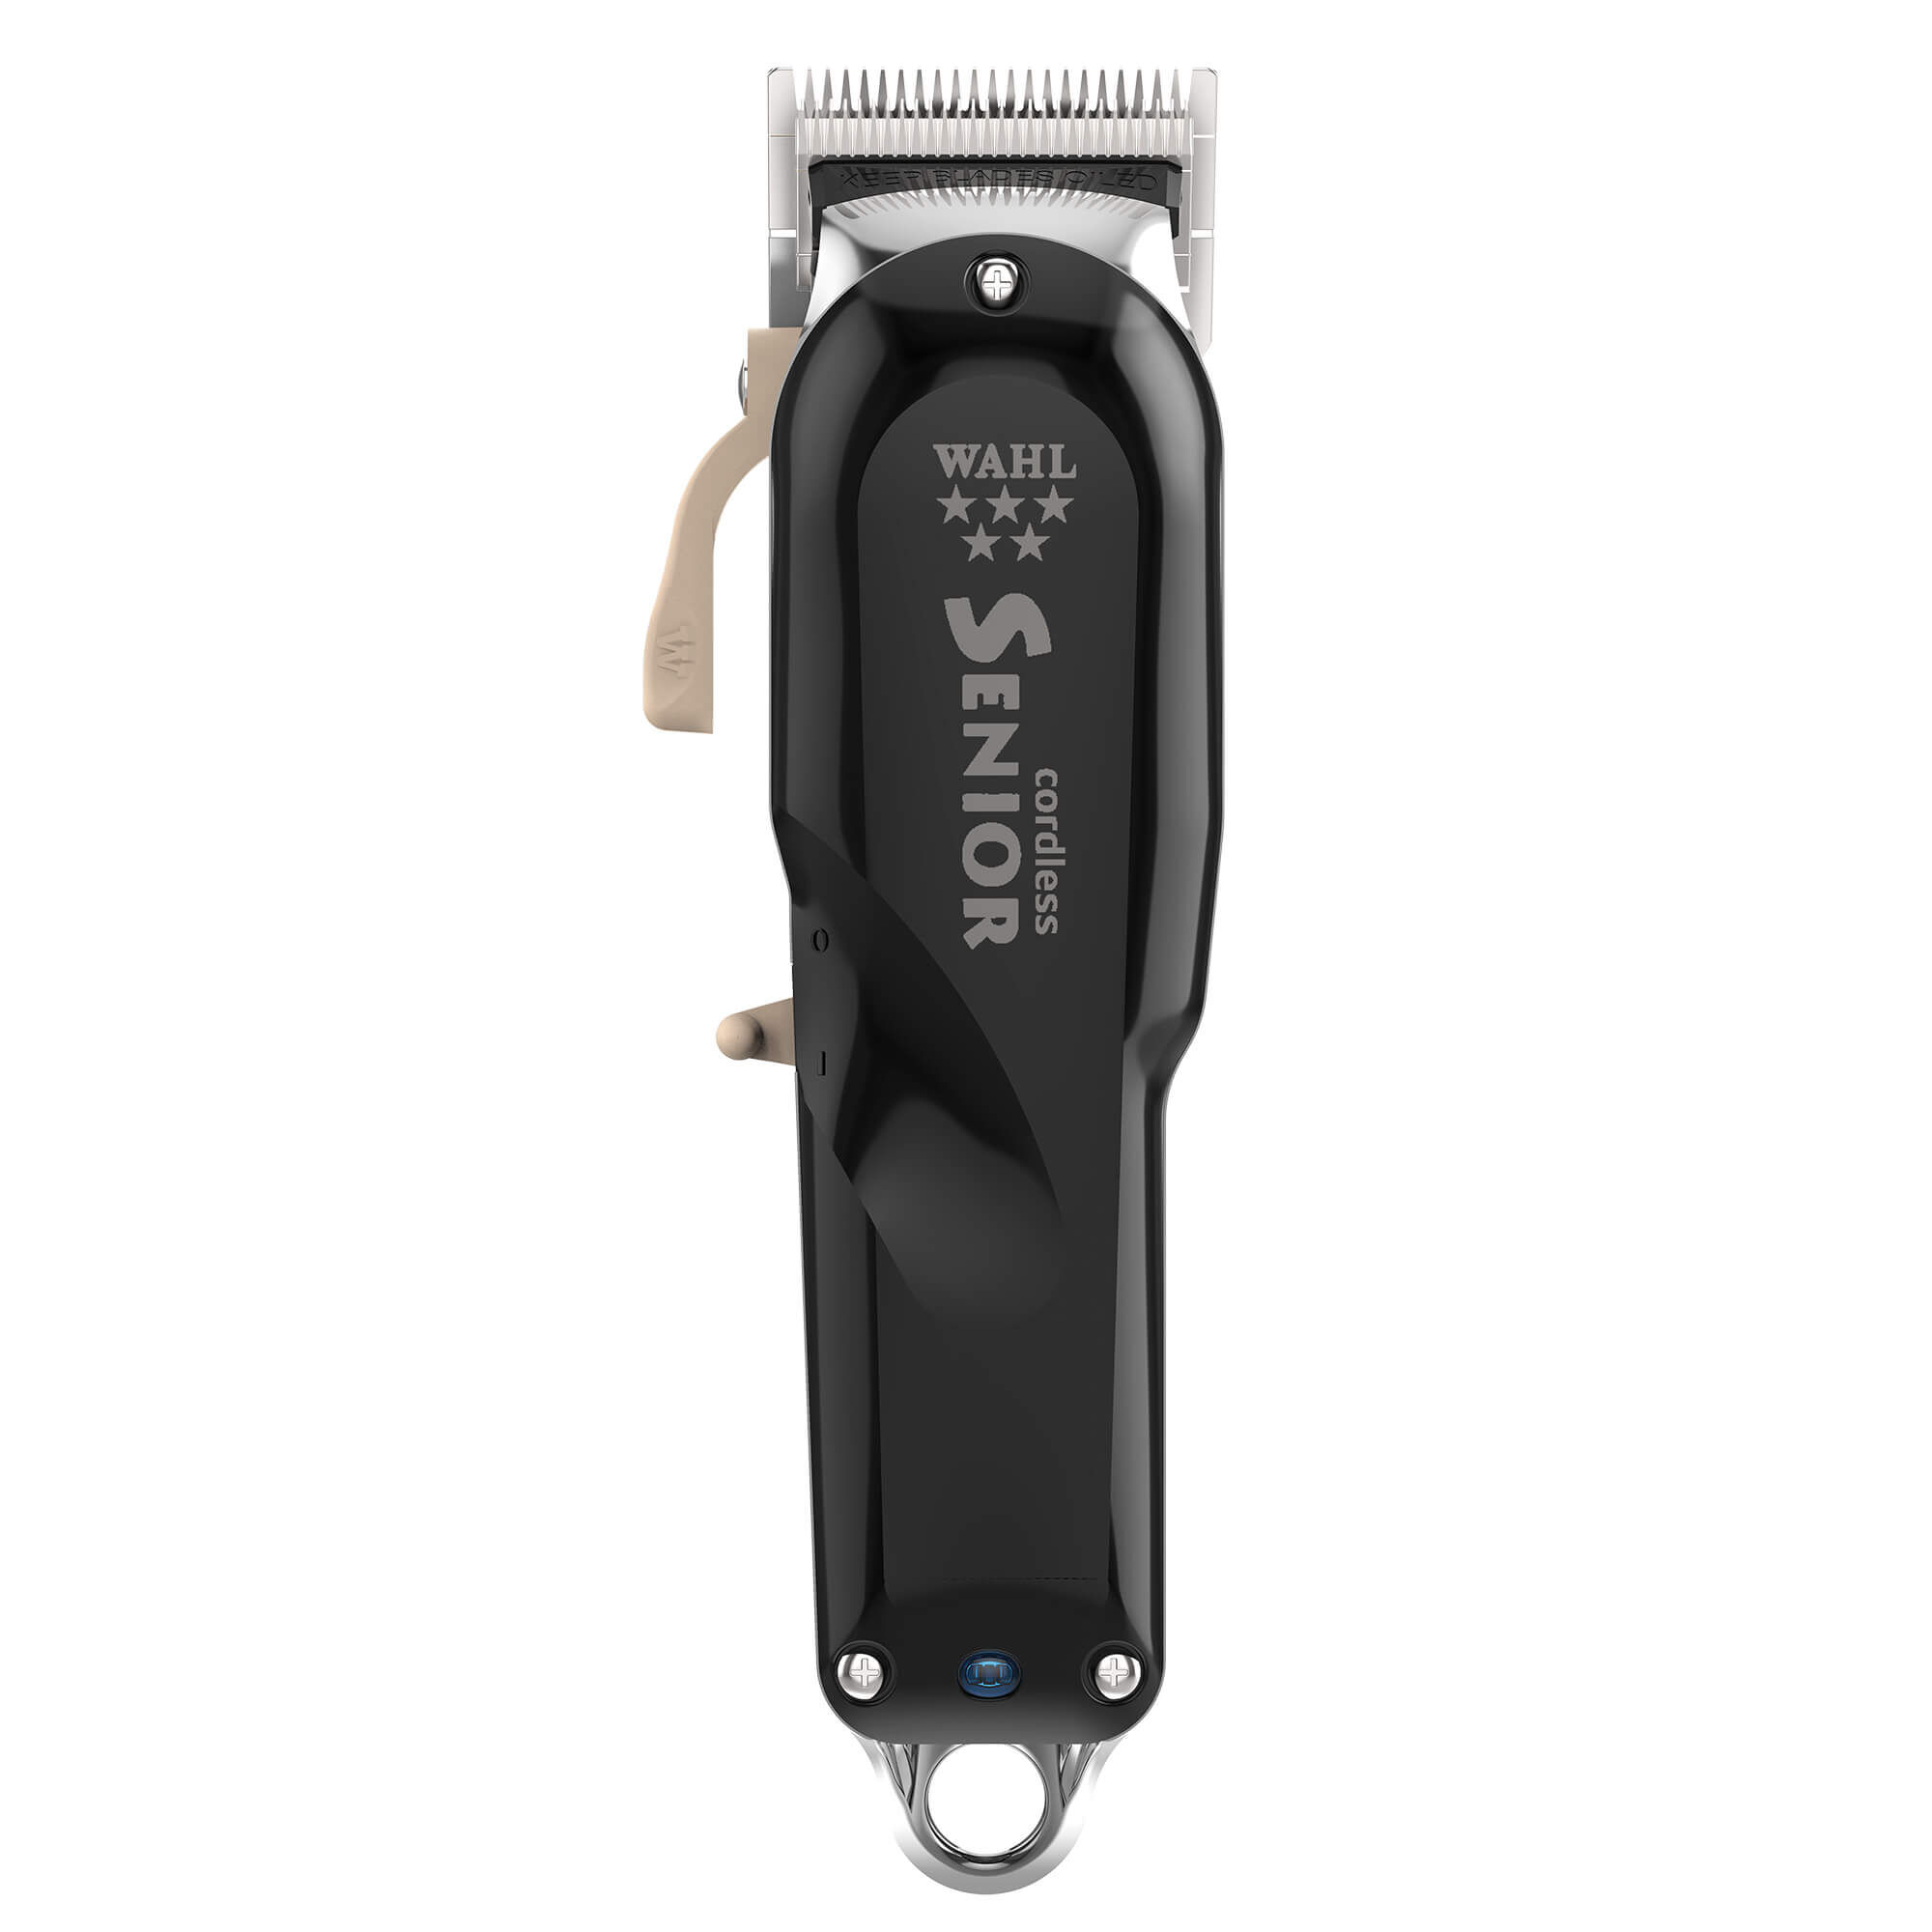 wahl cordless hair clippers